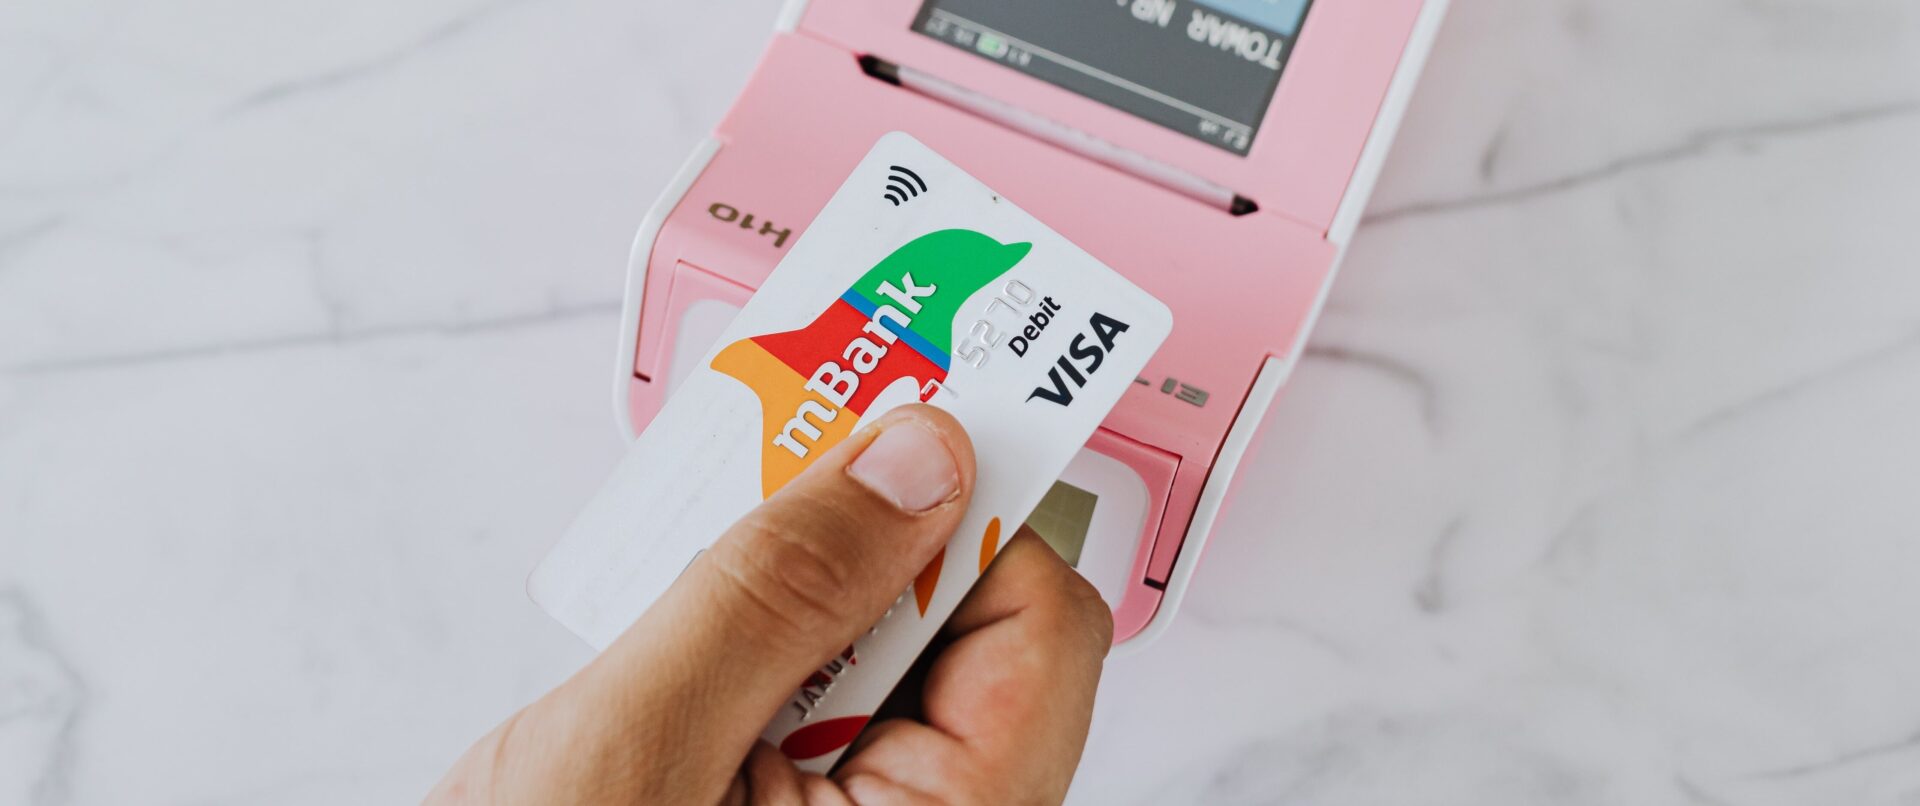 How to Use “Tap to Pay” or “Contactless” Credit or Debit Cards